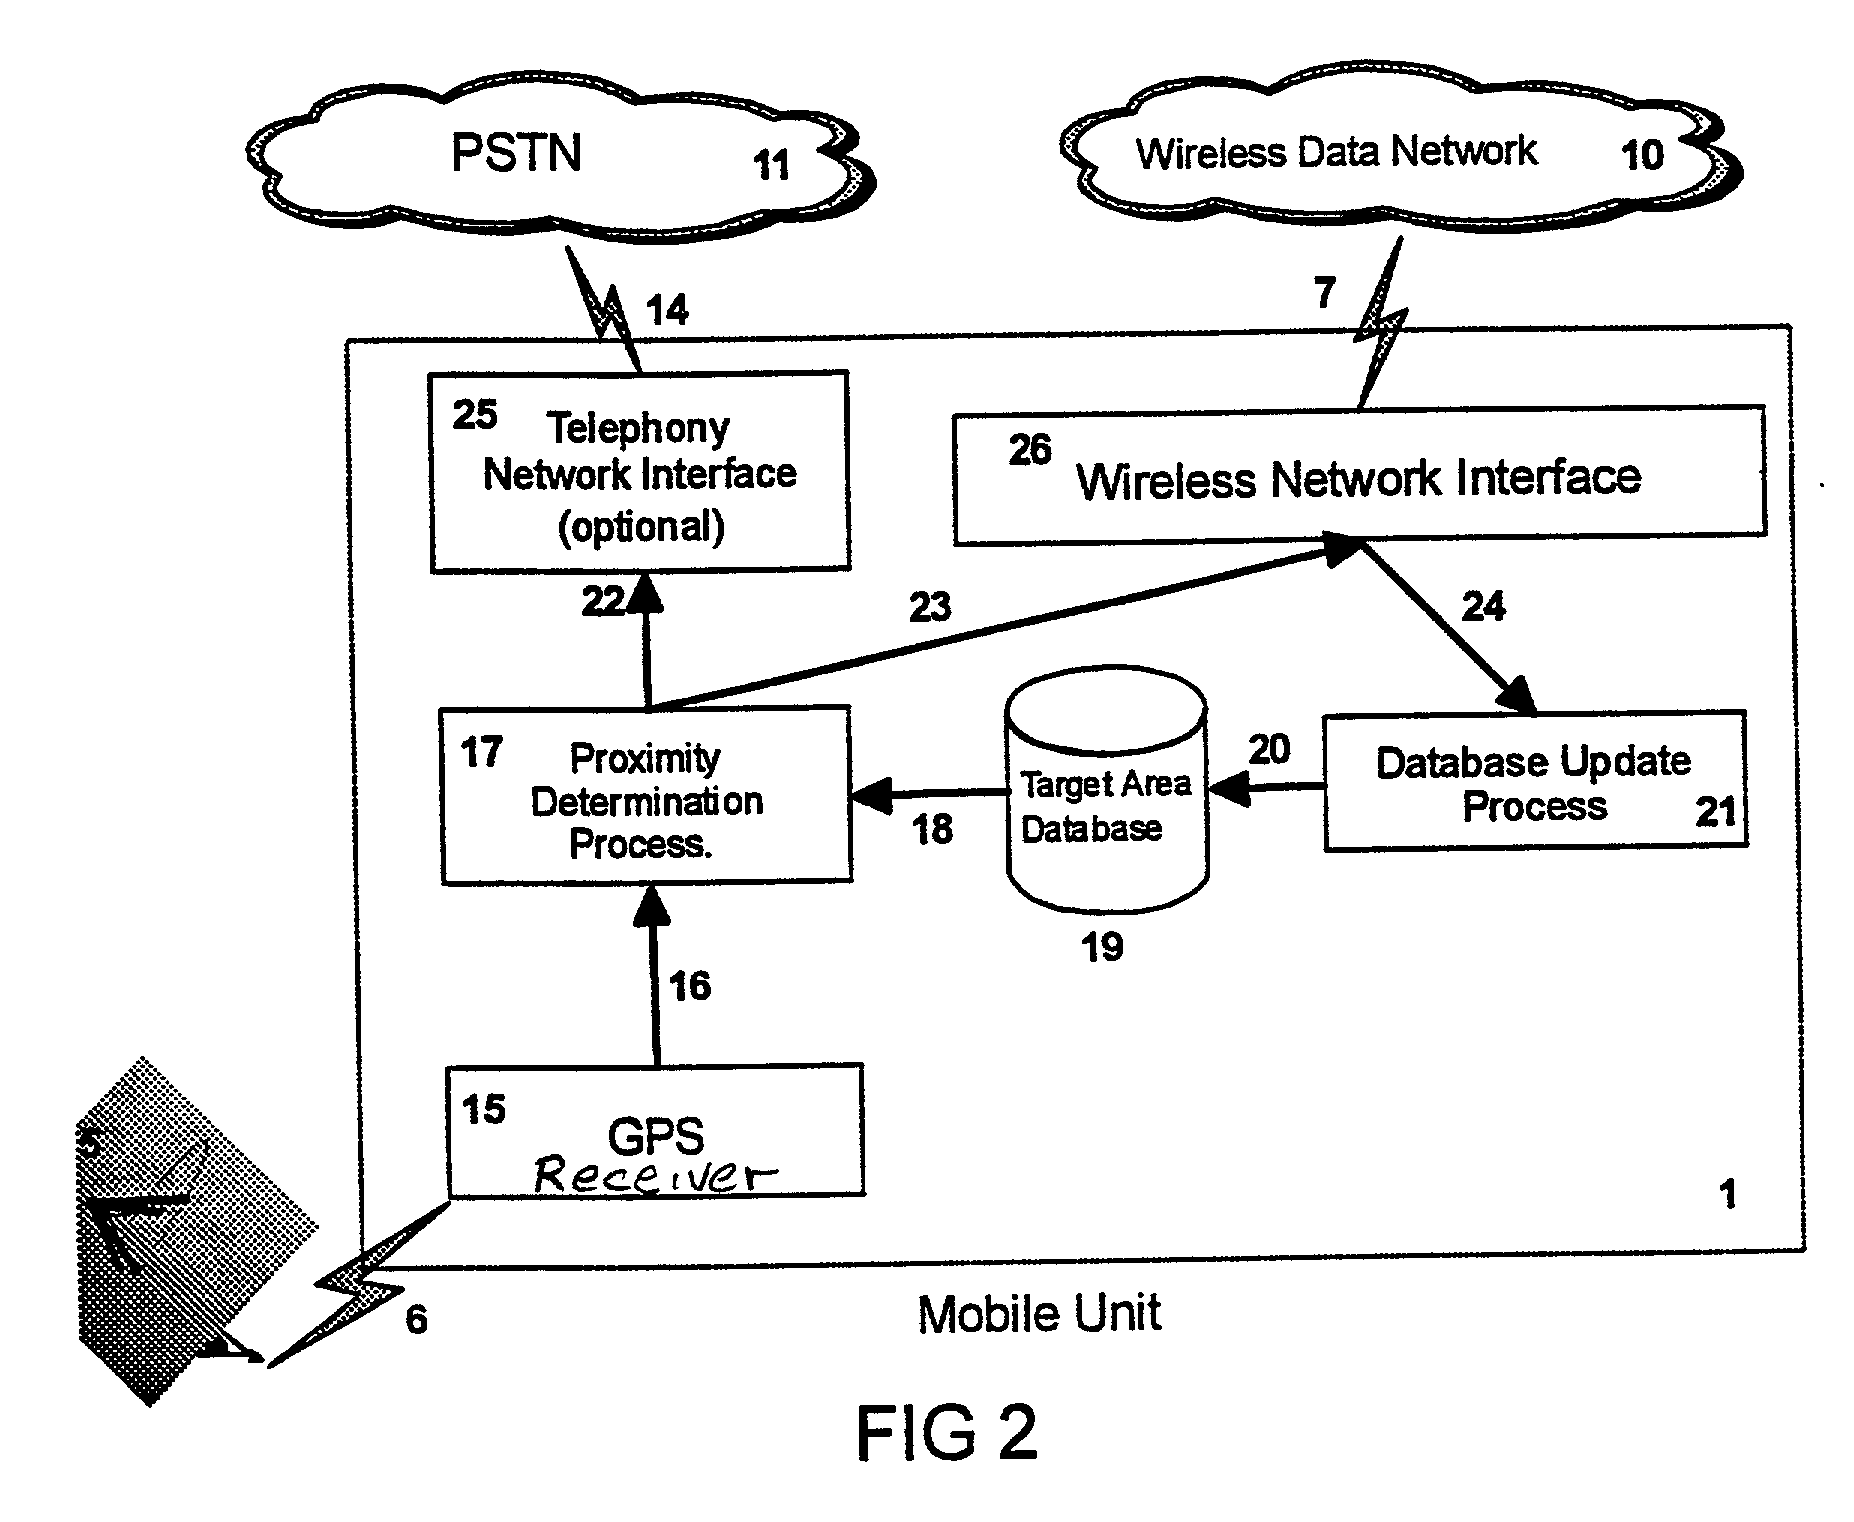 Mobile unit location system for automatically reporting to a central controller and subscriber the proximity of mobile units to a destination